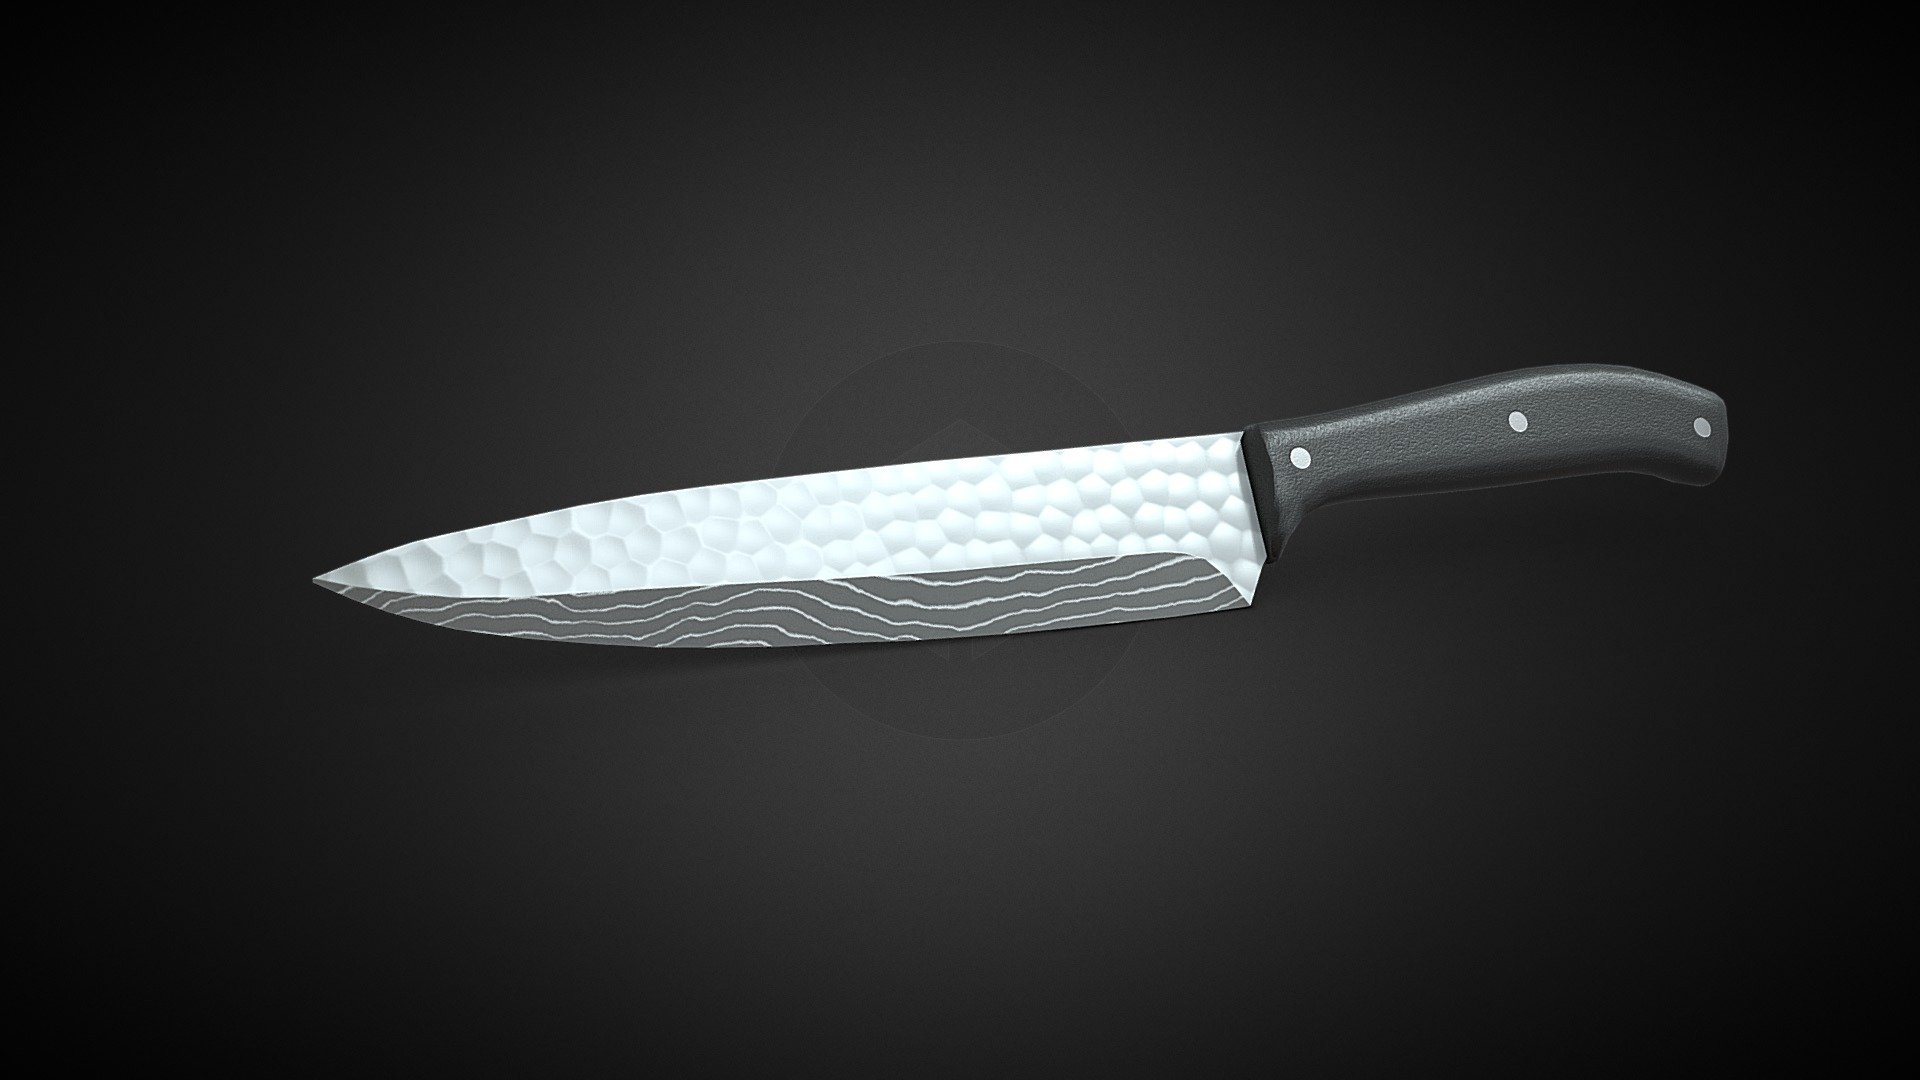 3d model of a Knife Kitchen . 
This product is made in Blender and ready to render in Cycle. Unit setup is metres and the models are scaled to match real life objects. 
The model comes with textures and materials and is positioned in the center of the coordinates system.

No additional plugin is needed to open the model.



Notes:


Geometry: Polygonal
Textures: Yes 
Rigged: No
Animated: No
UV Mapped: Yes
Unwrapped UVs: Yes, non-overlapping

Bake normal map



Note: don't forget to take a few seconds to rate this product, your support will allow me to continue working .
Thanks in advance for your help and happy blending!



Hope you like it! Thank you!



My youtube channel : https://www.youtube.com/toss90 - Knife Kitchen - Buy Royalty Free 3D model by Toss90 3d model